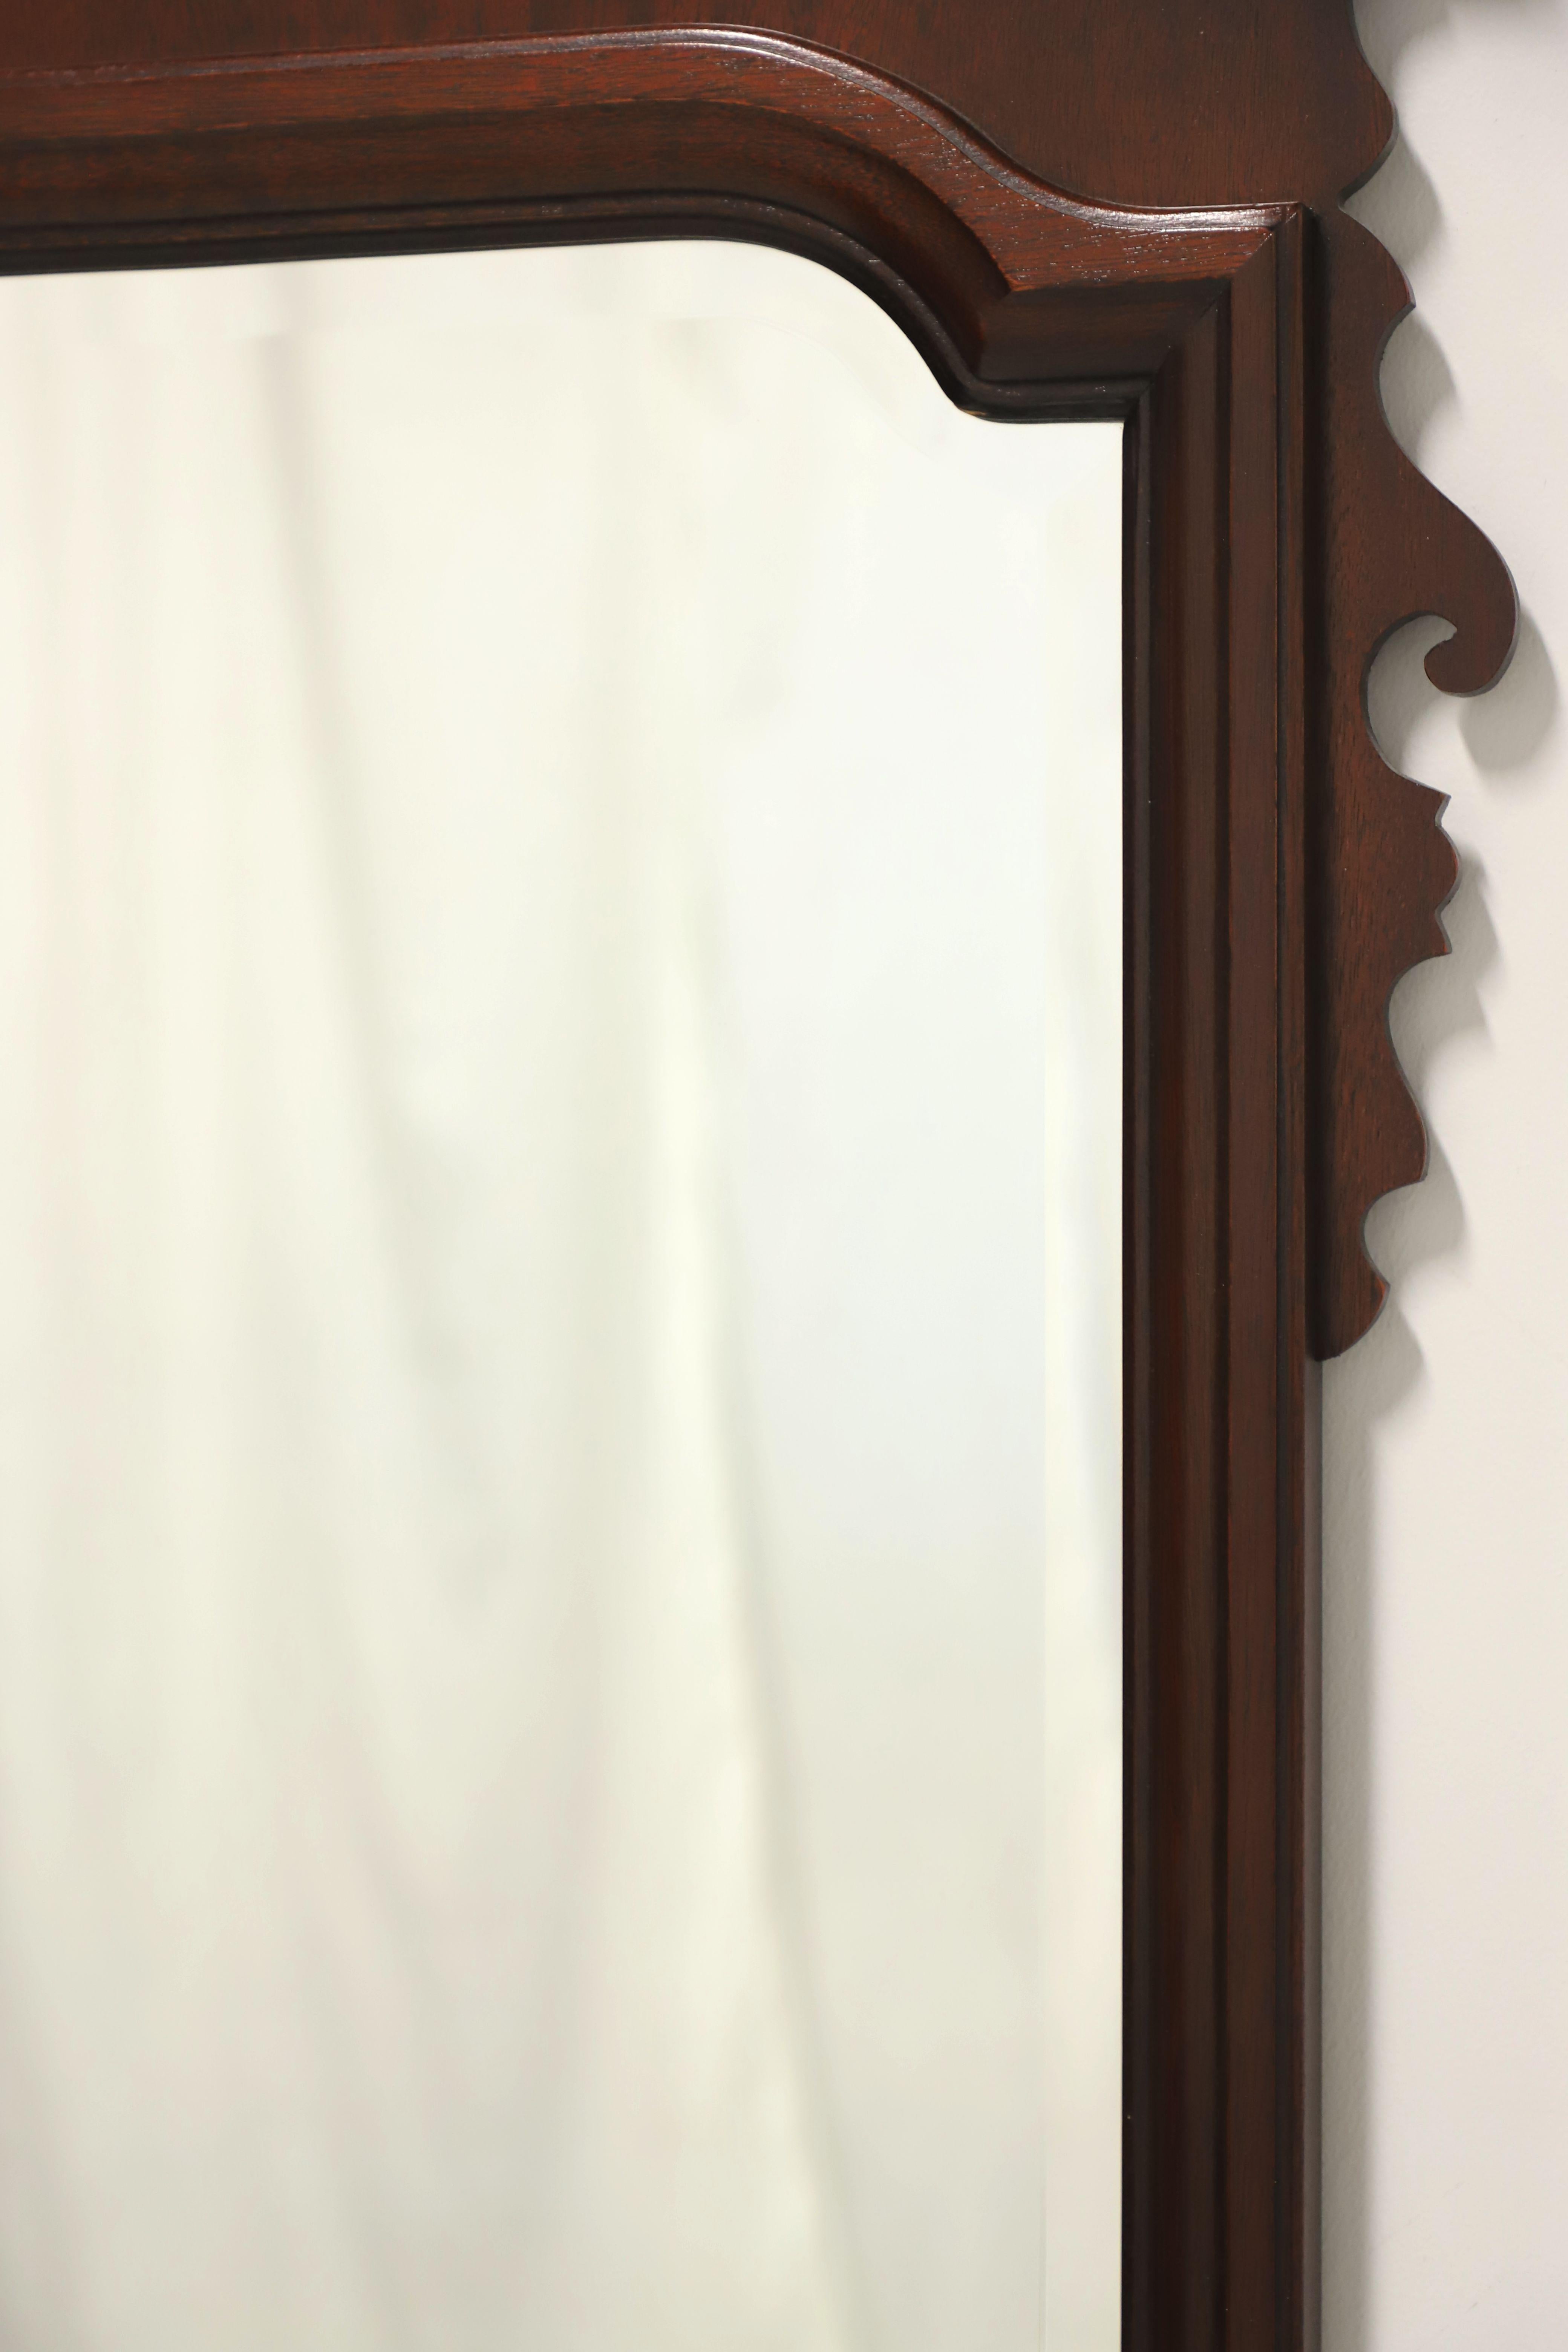 20th Century LINK-TAYLOR Heirloom Broken Arch Solid Mahogany Chippendale Beveled Wall Mirror For Sale